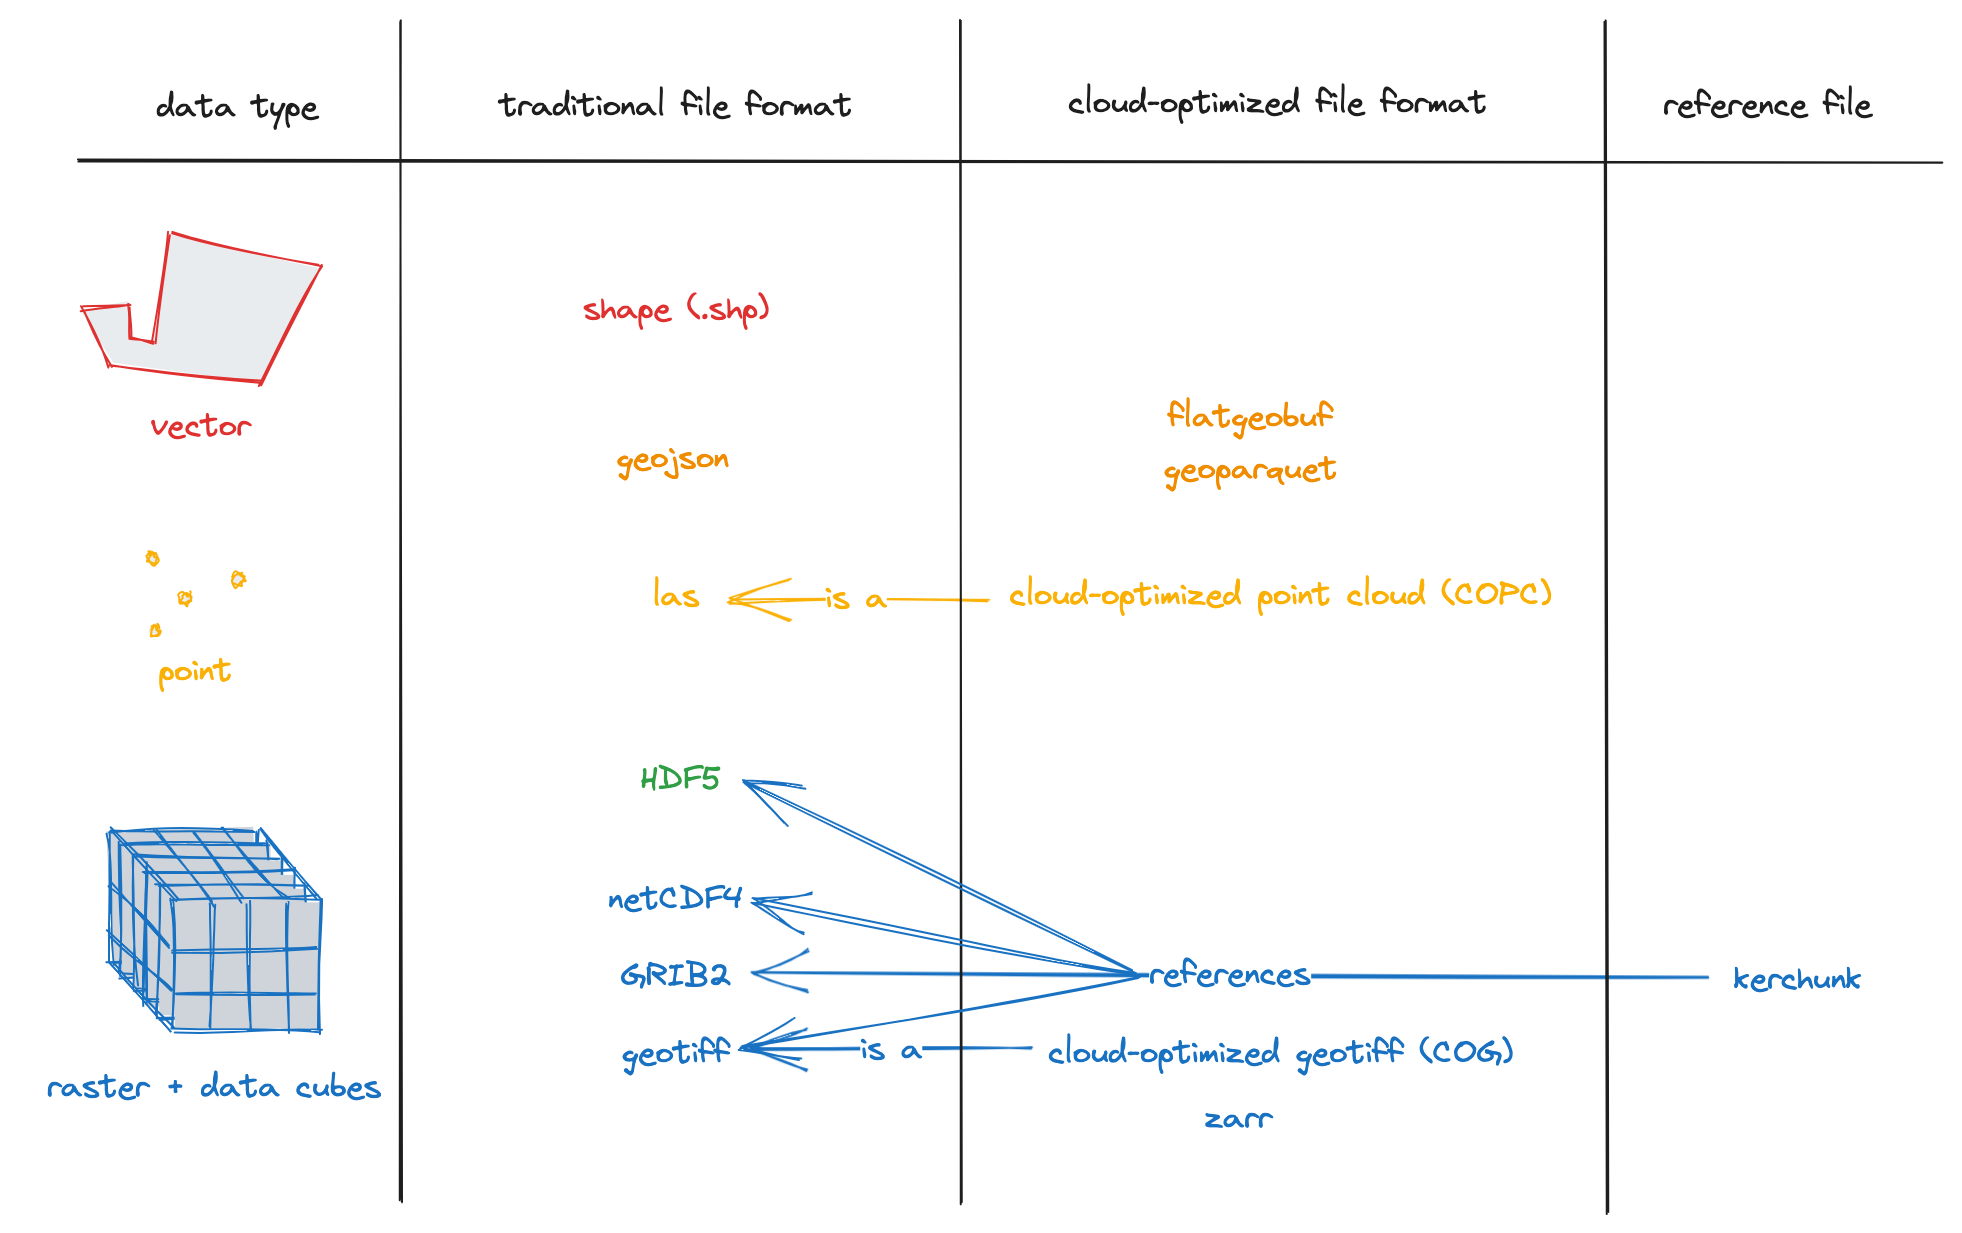 A diagram showing a variety of cloud-optimized geospatial formats